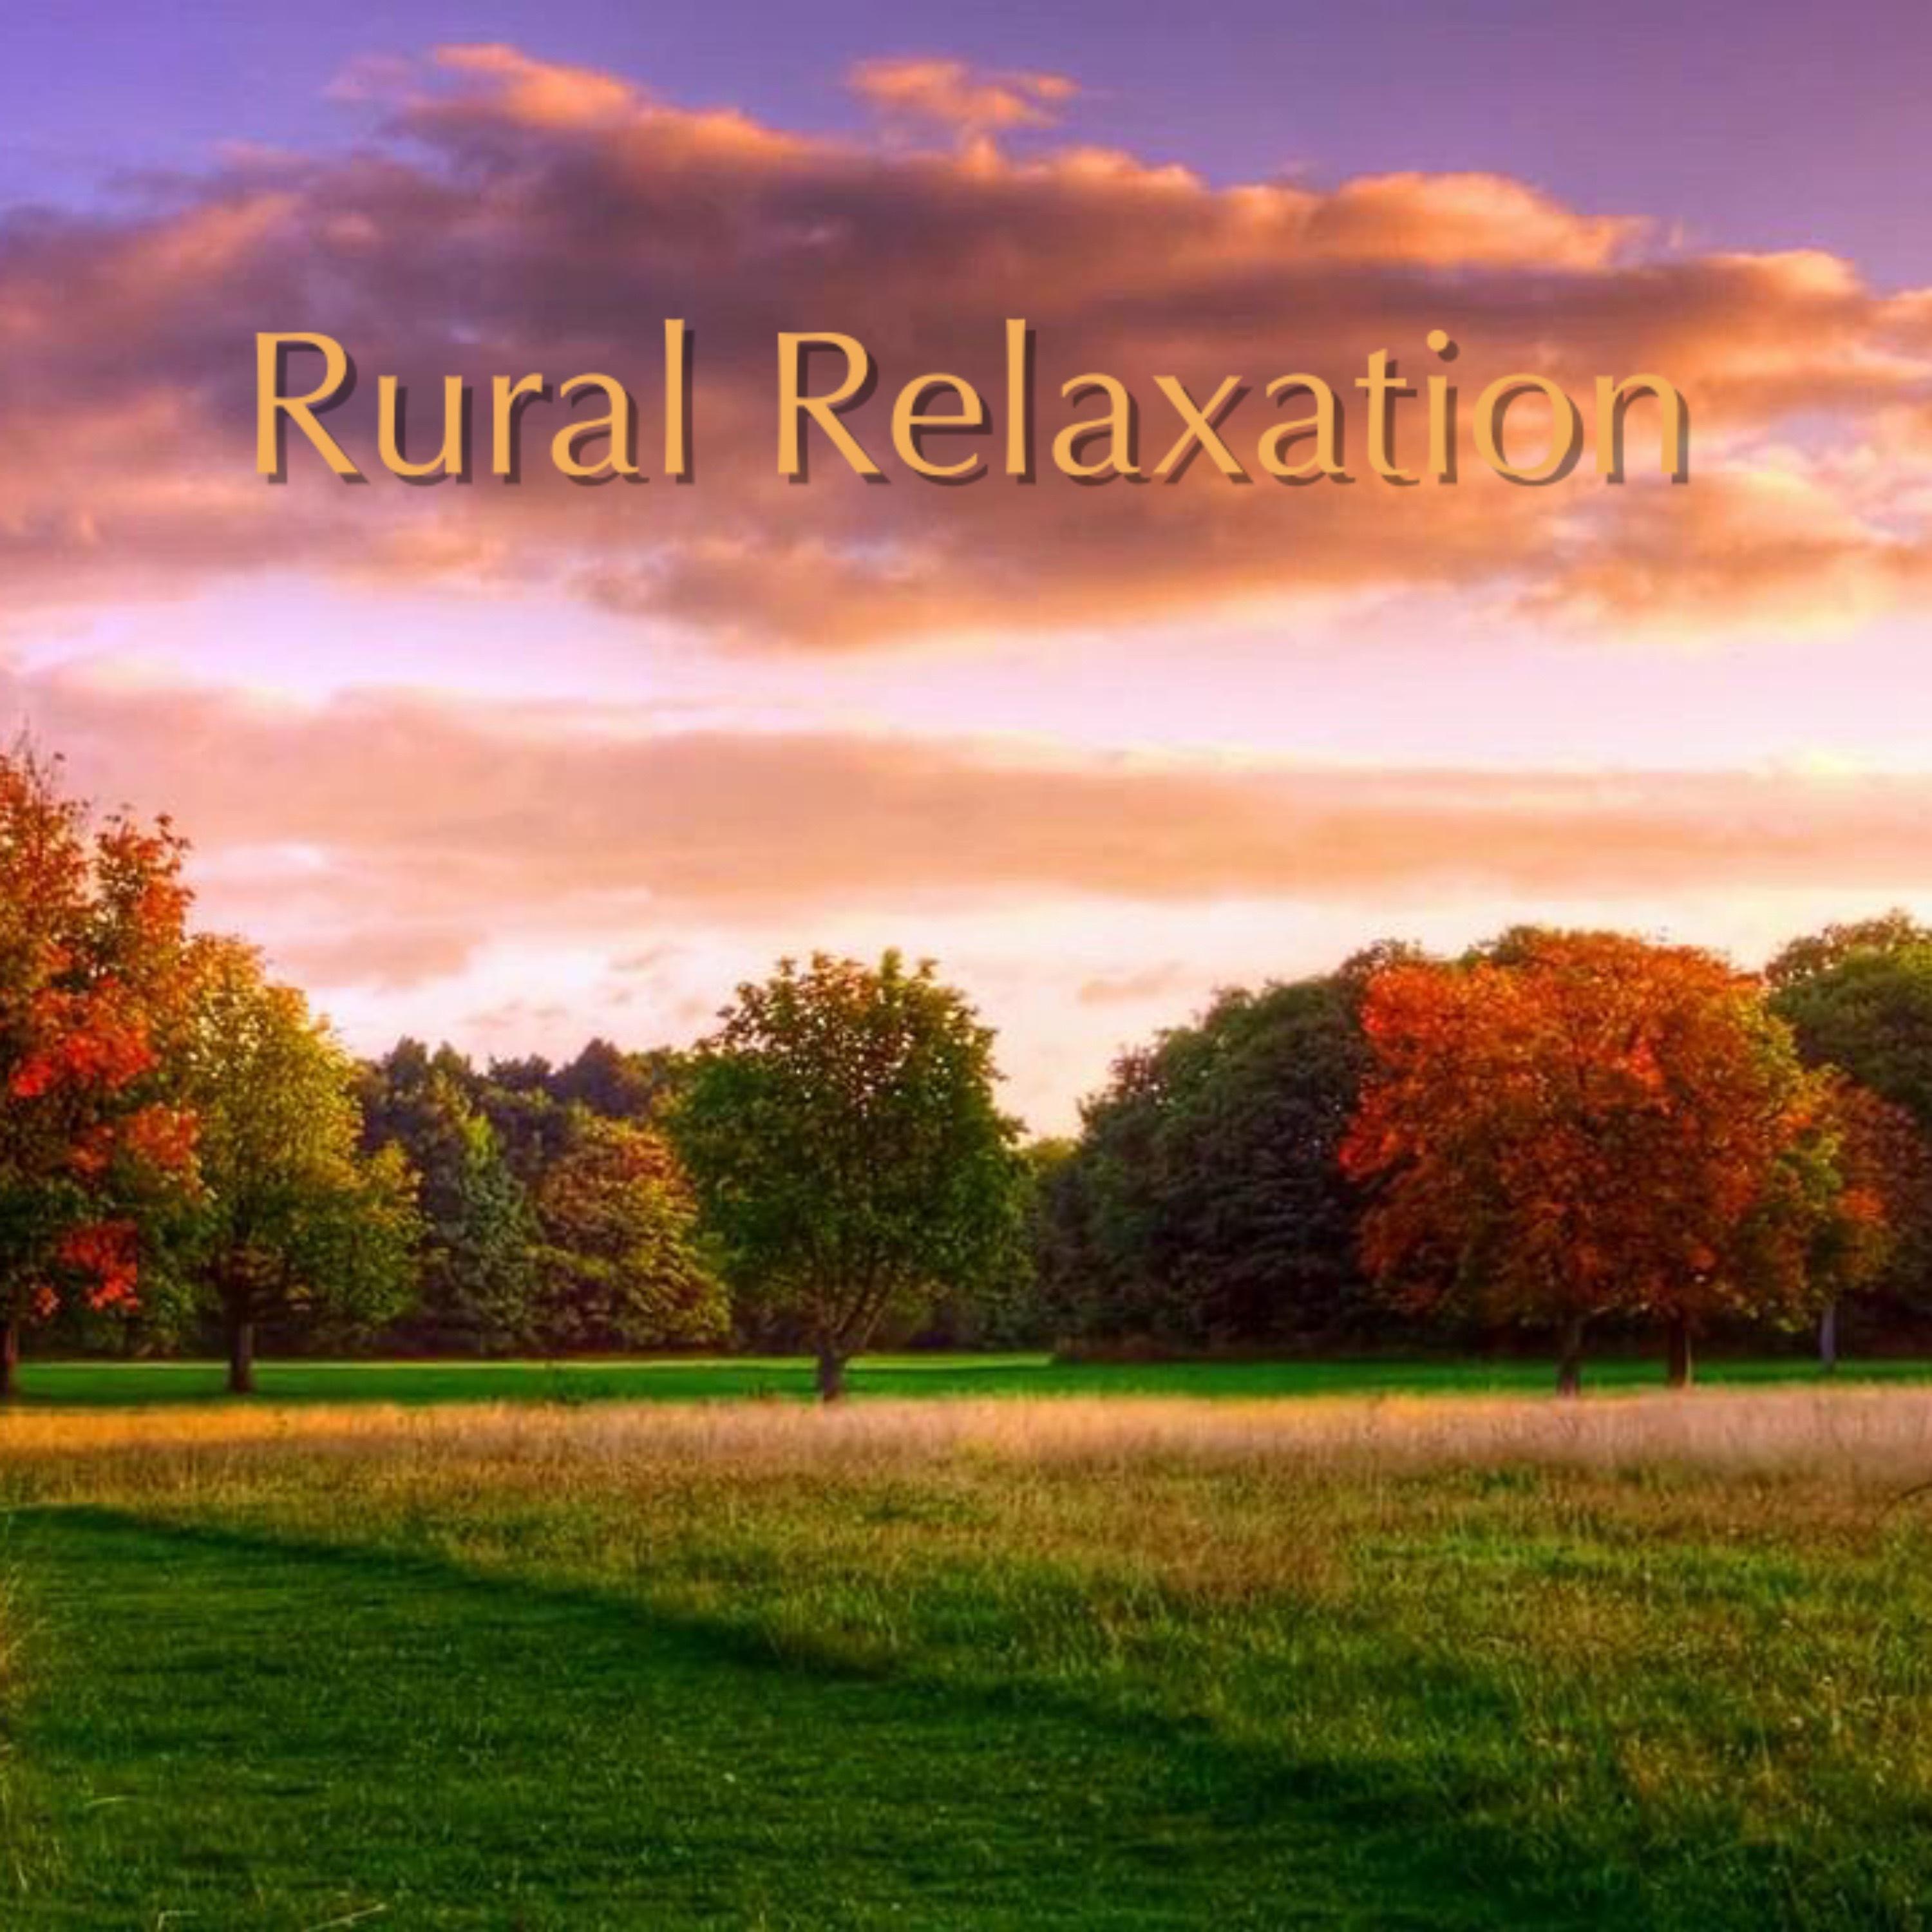 Rural Relaxation